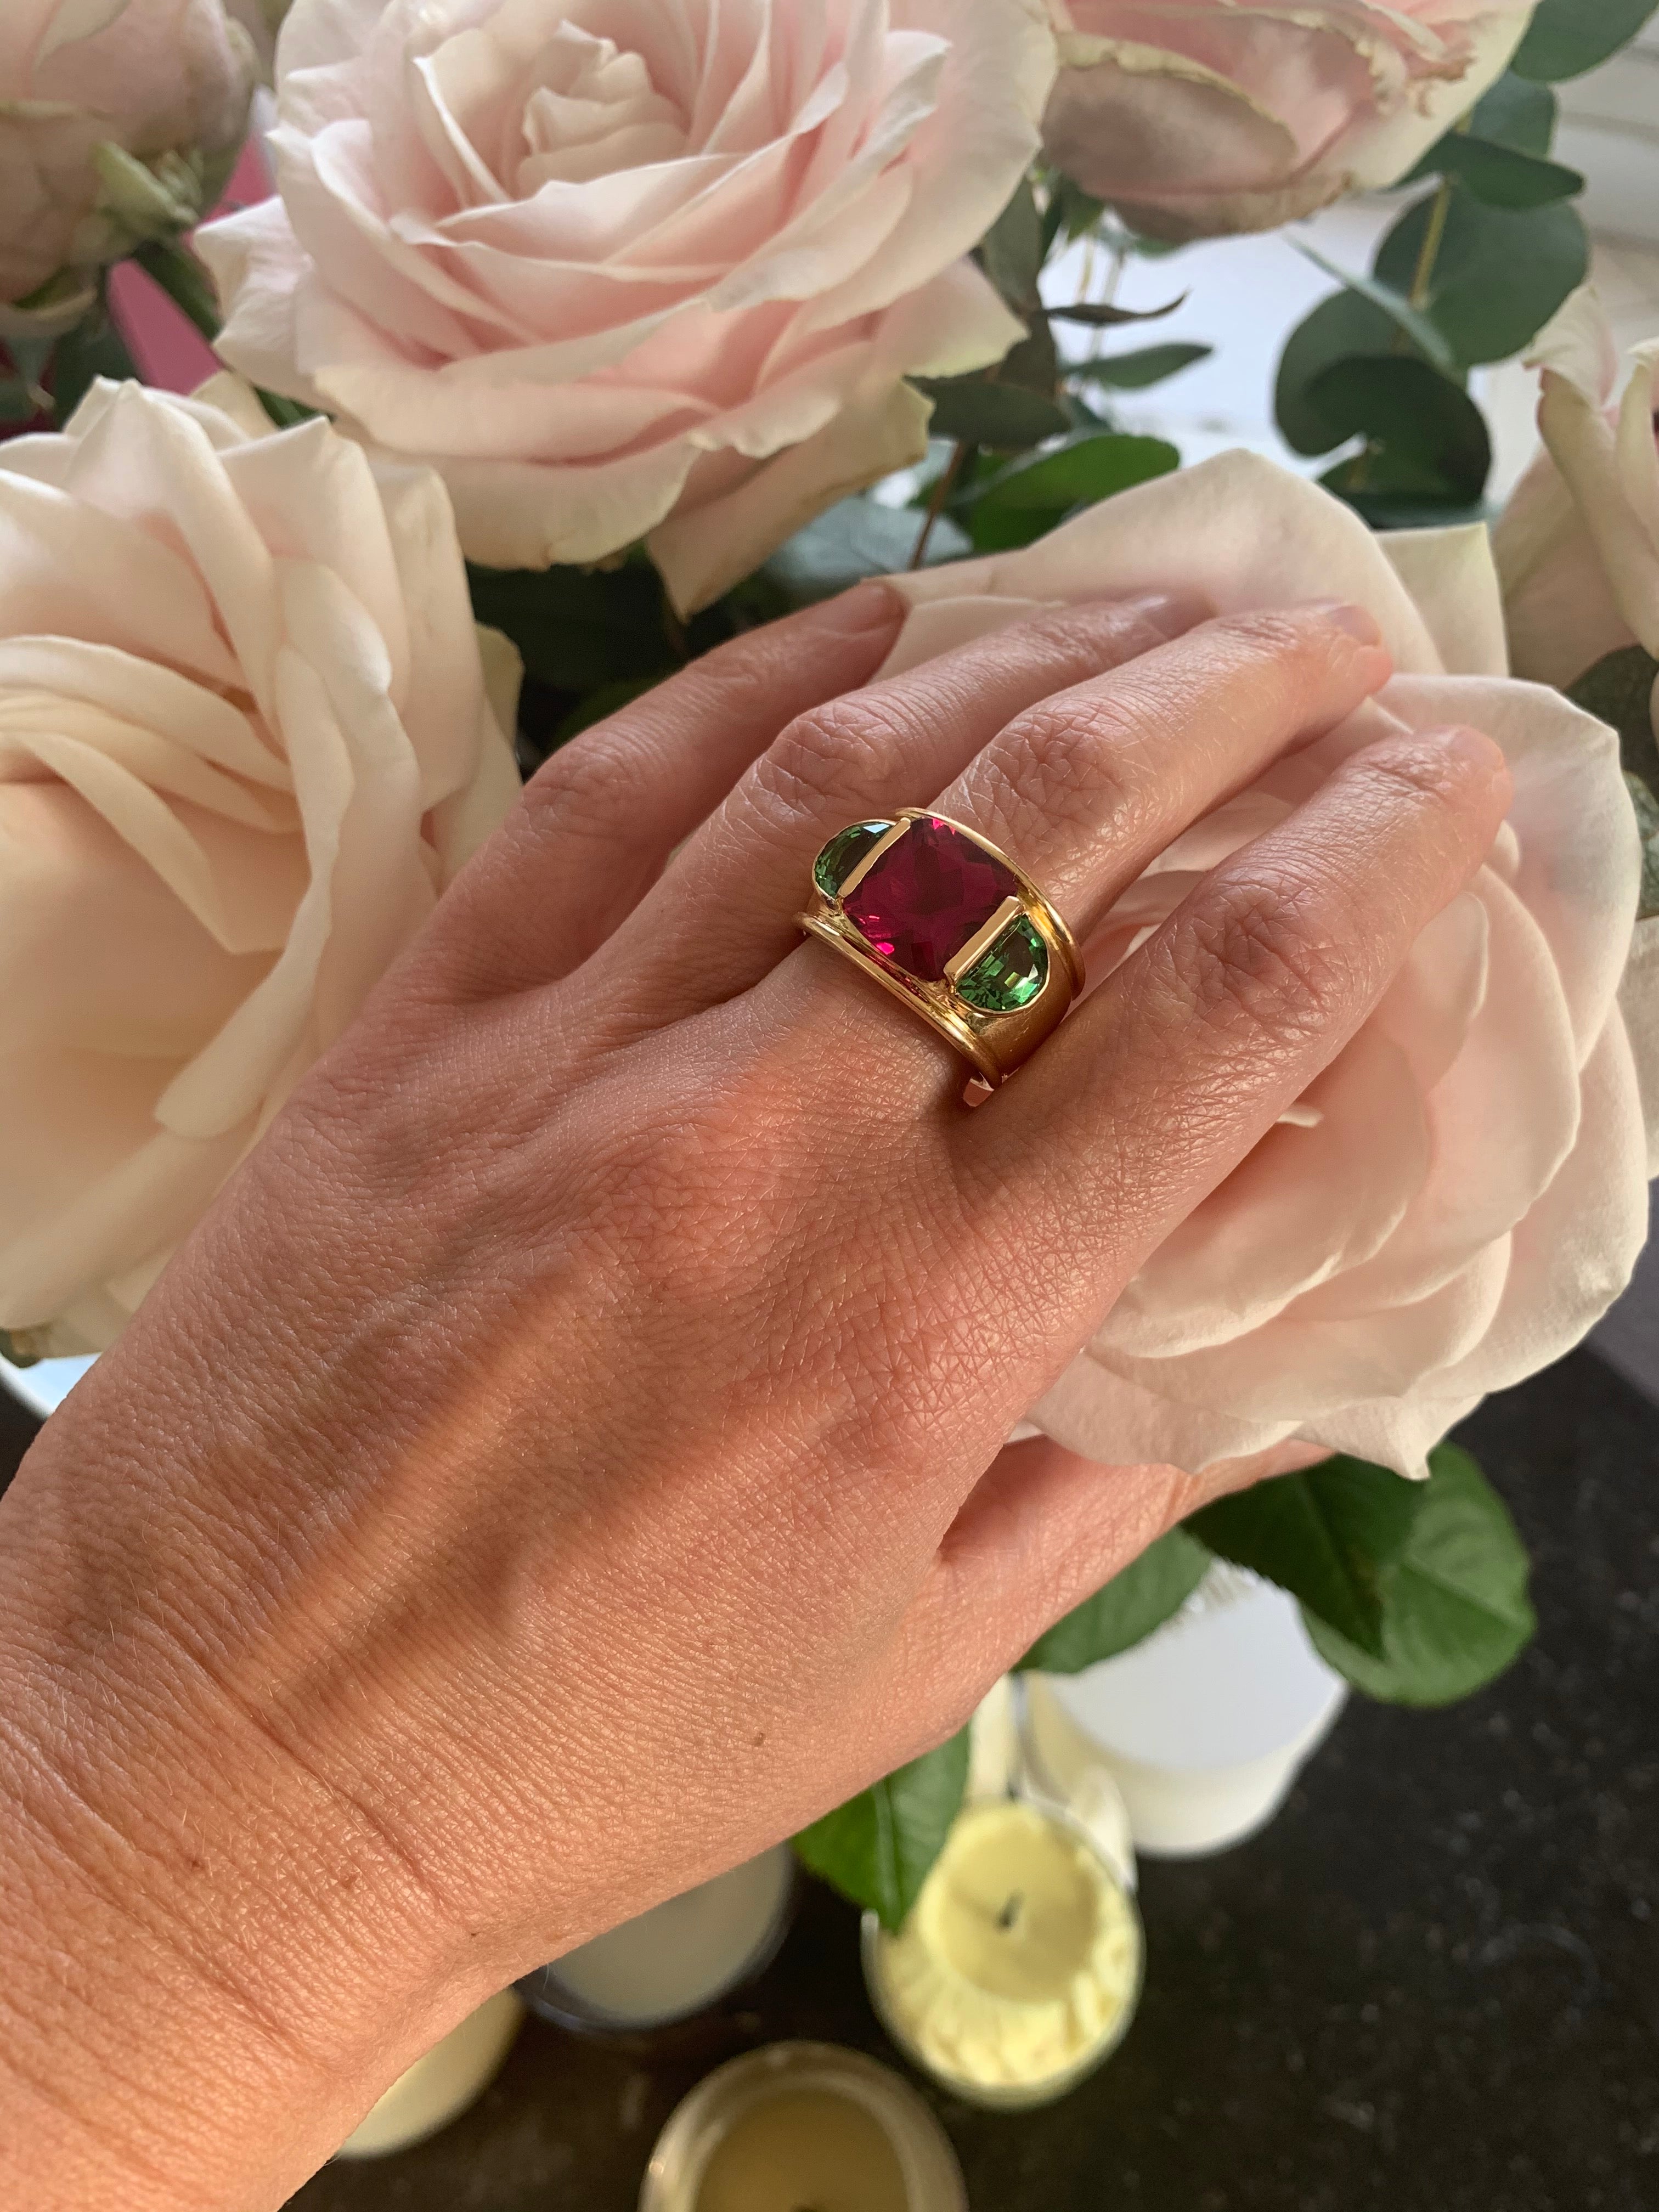 Square Rubellite and Green Tourmaline 18K Yellow Gold Band Ring